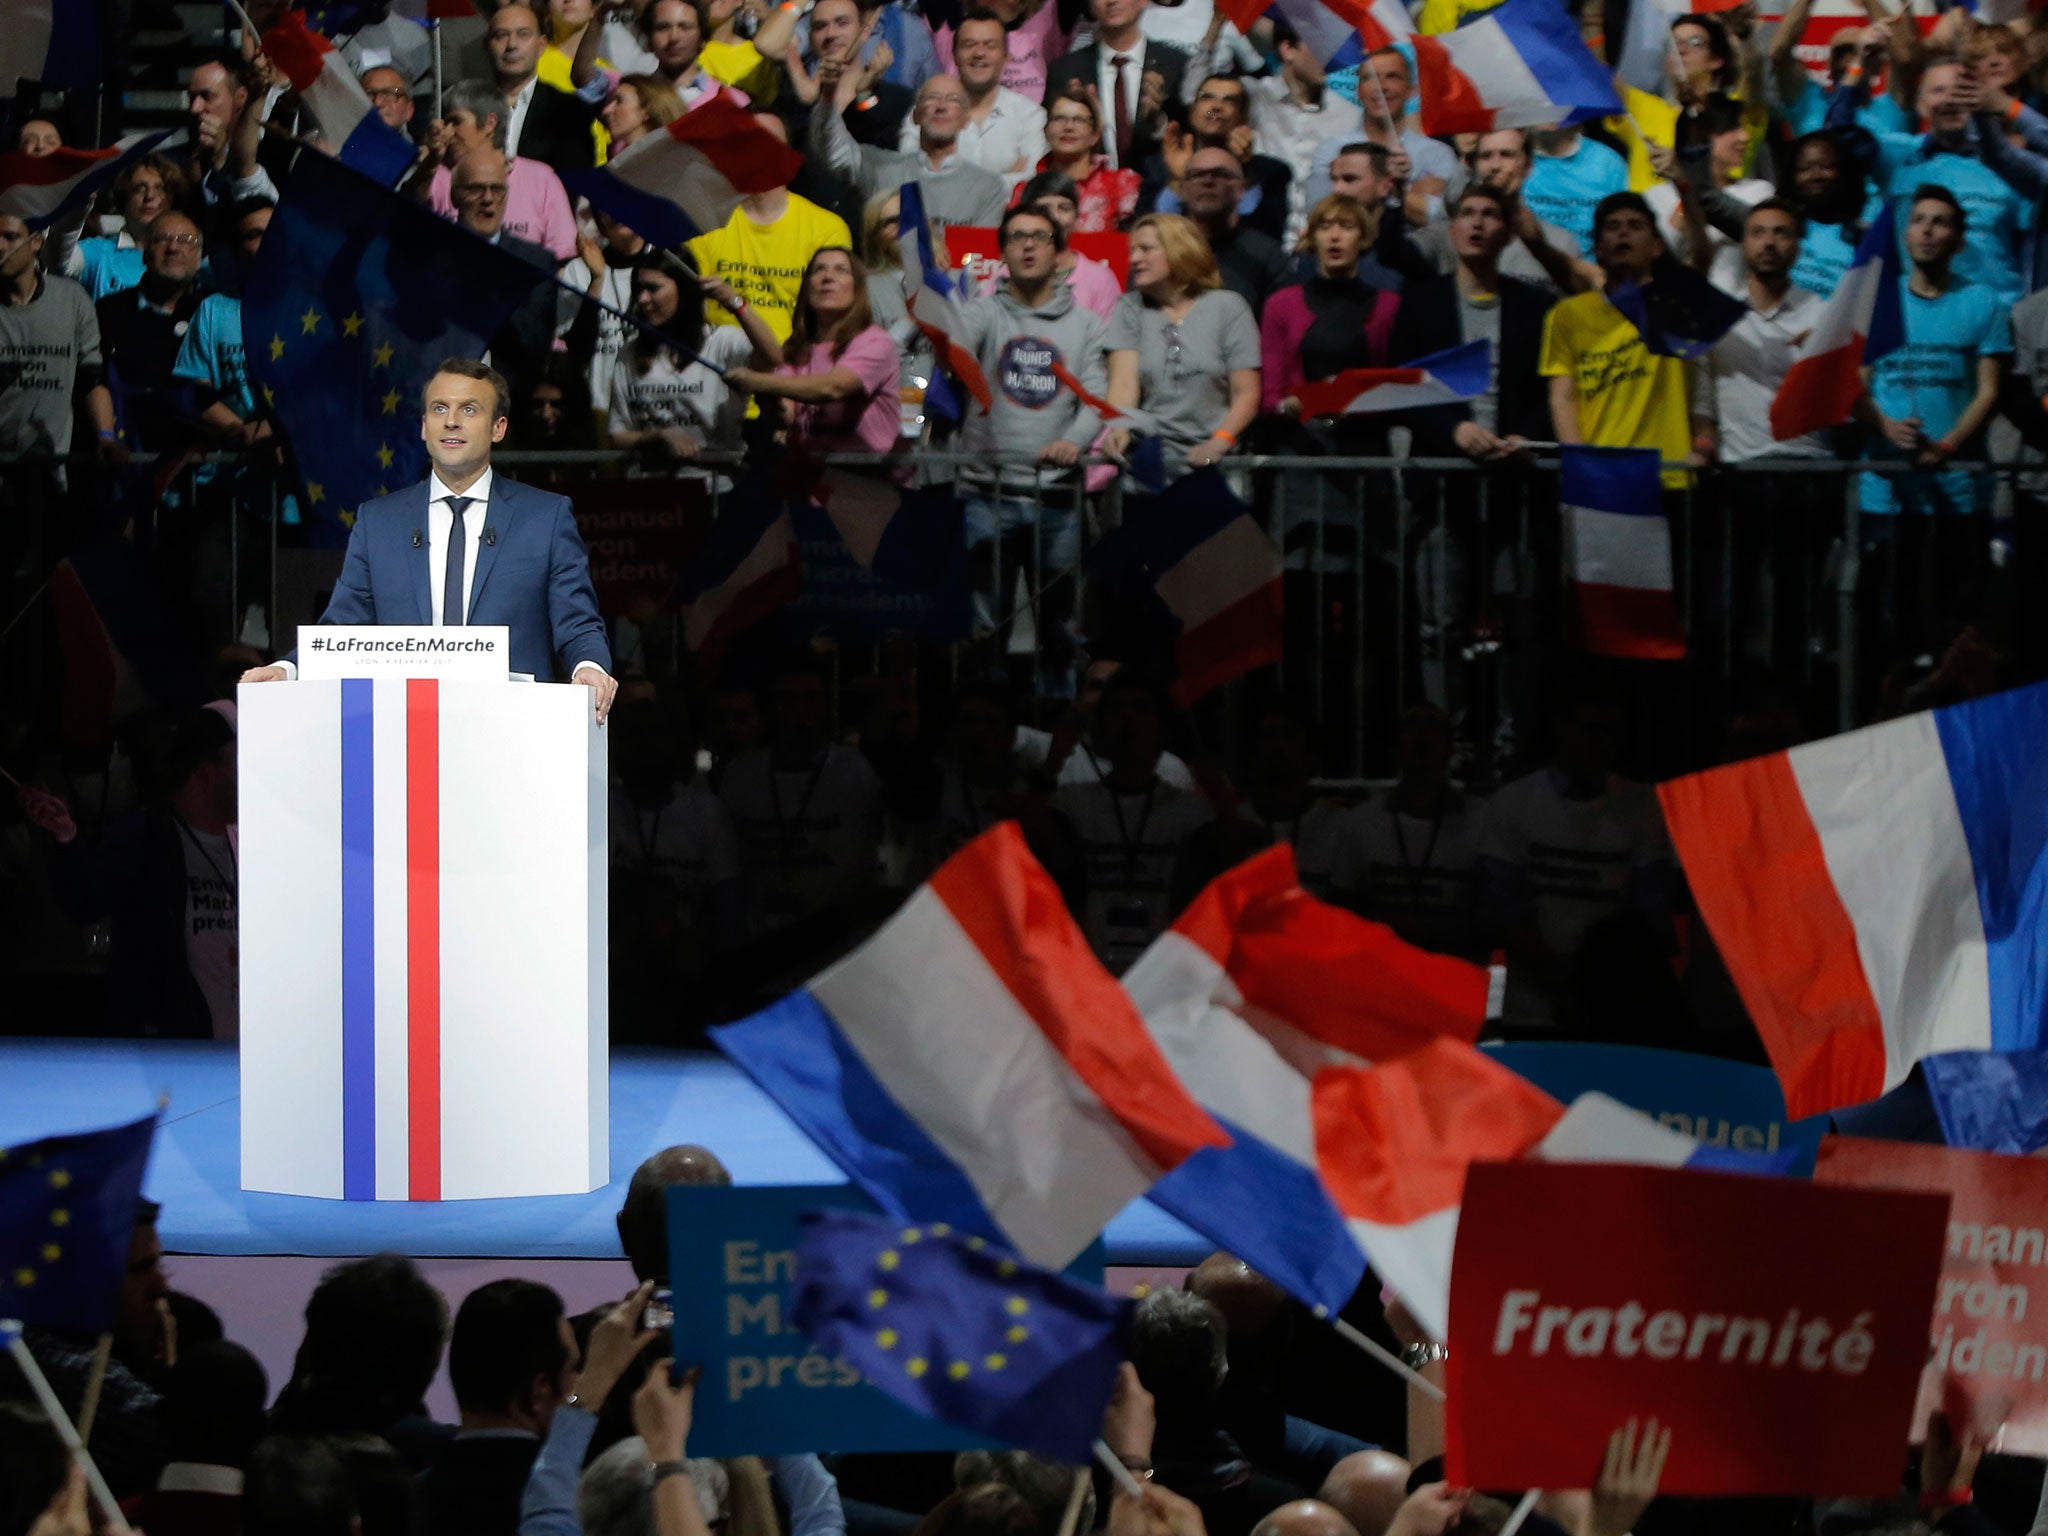 Hopes are pinned on independent Emmanuel Macron to stymie the far-right in France and Europe